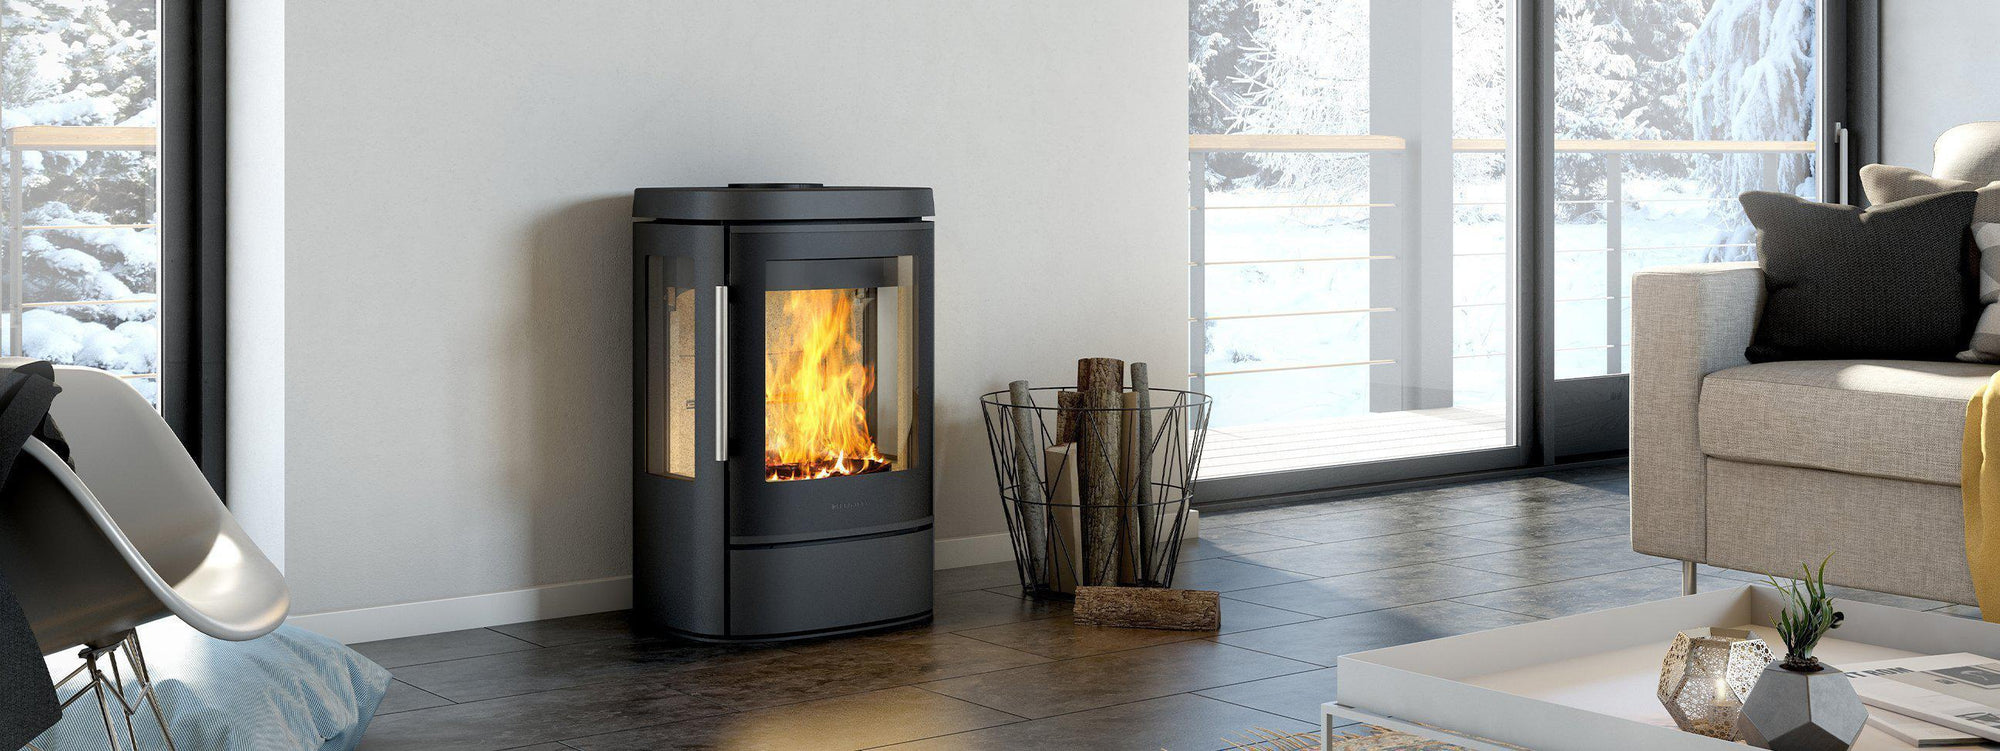 DIBt Tested Stoves